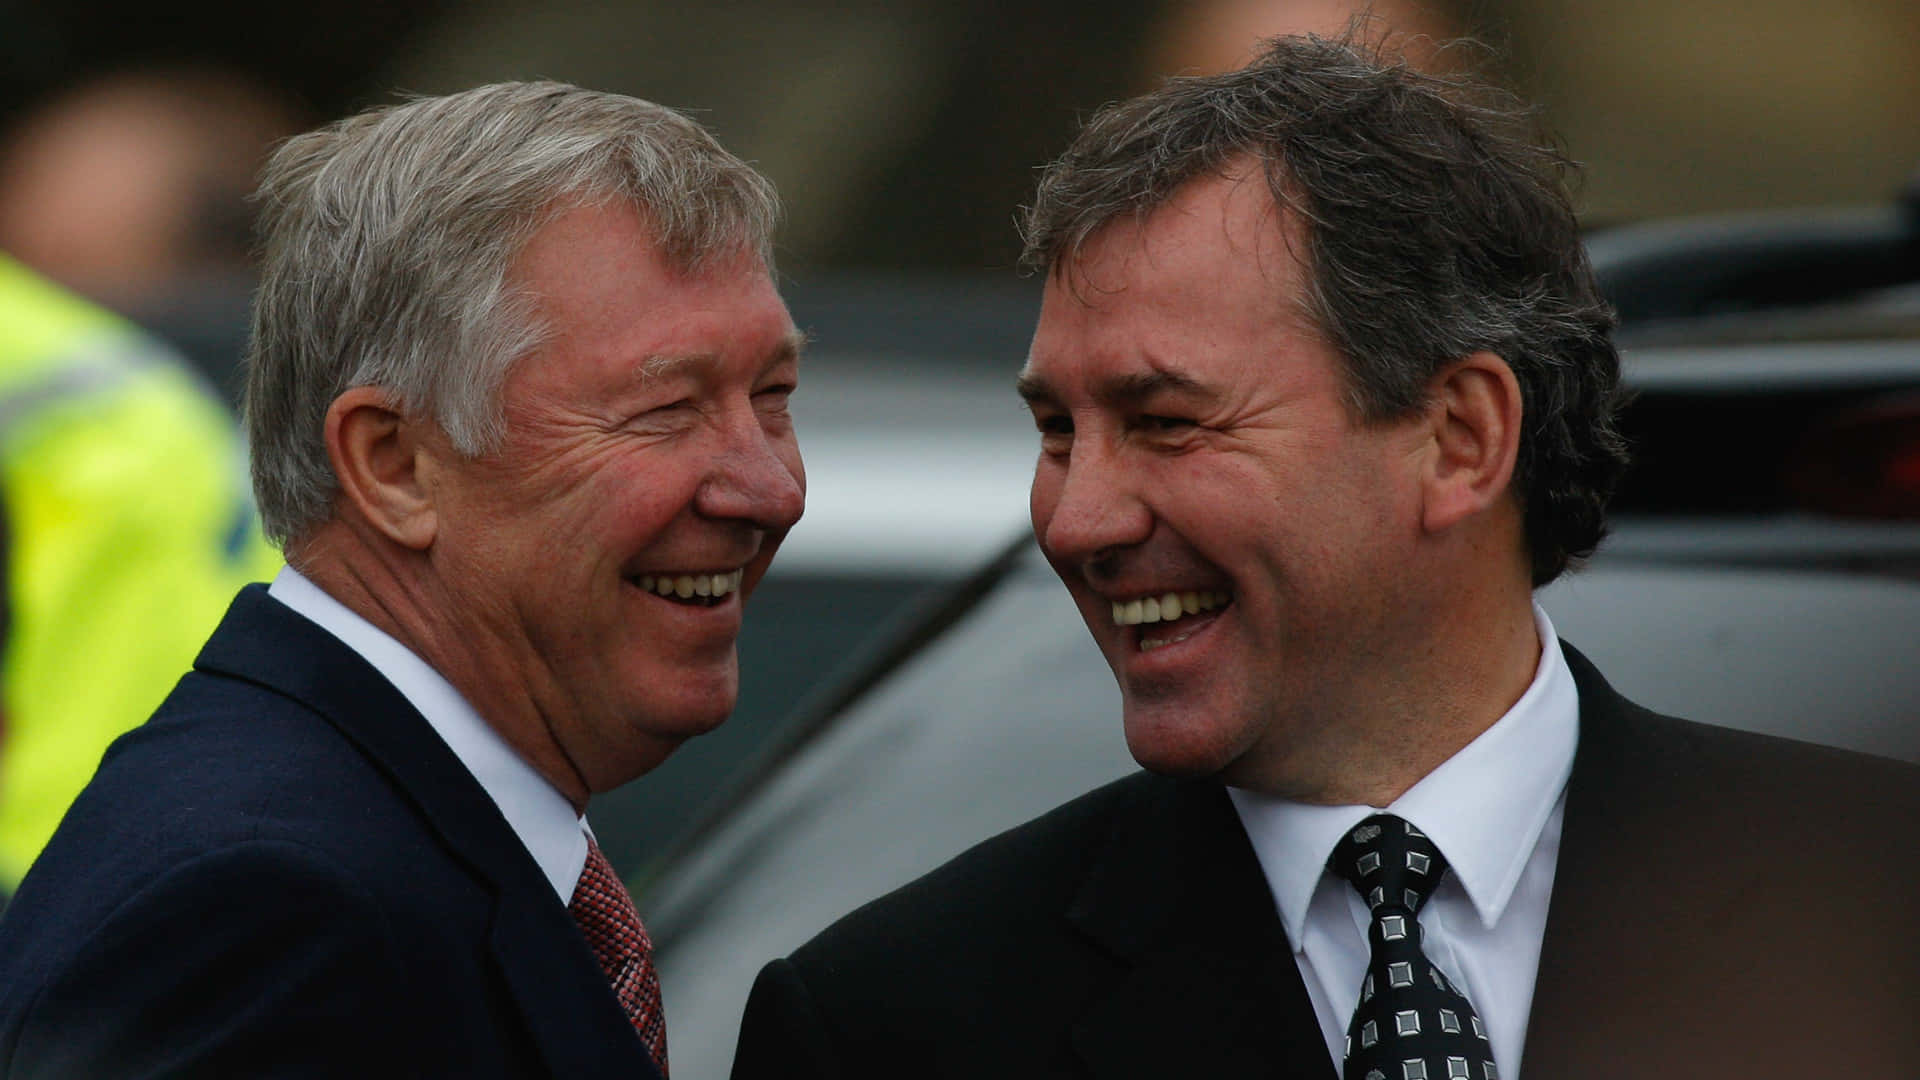 Football Legends Bryan Robson And Bobby Robson Wallpaper